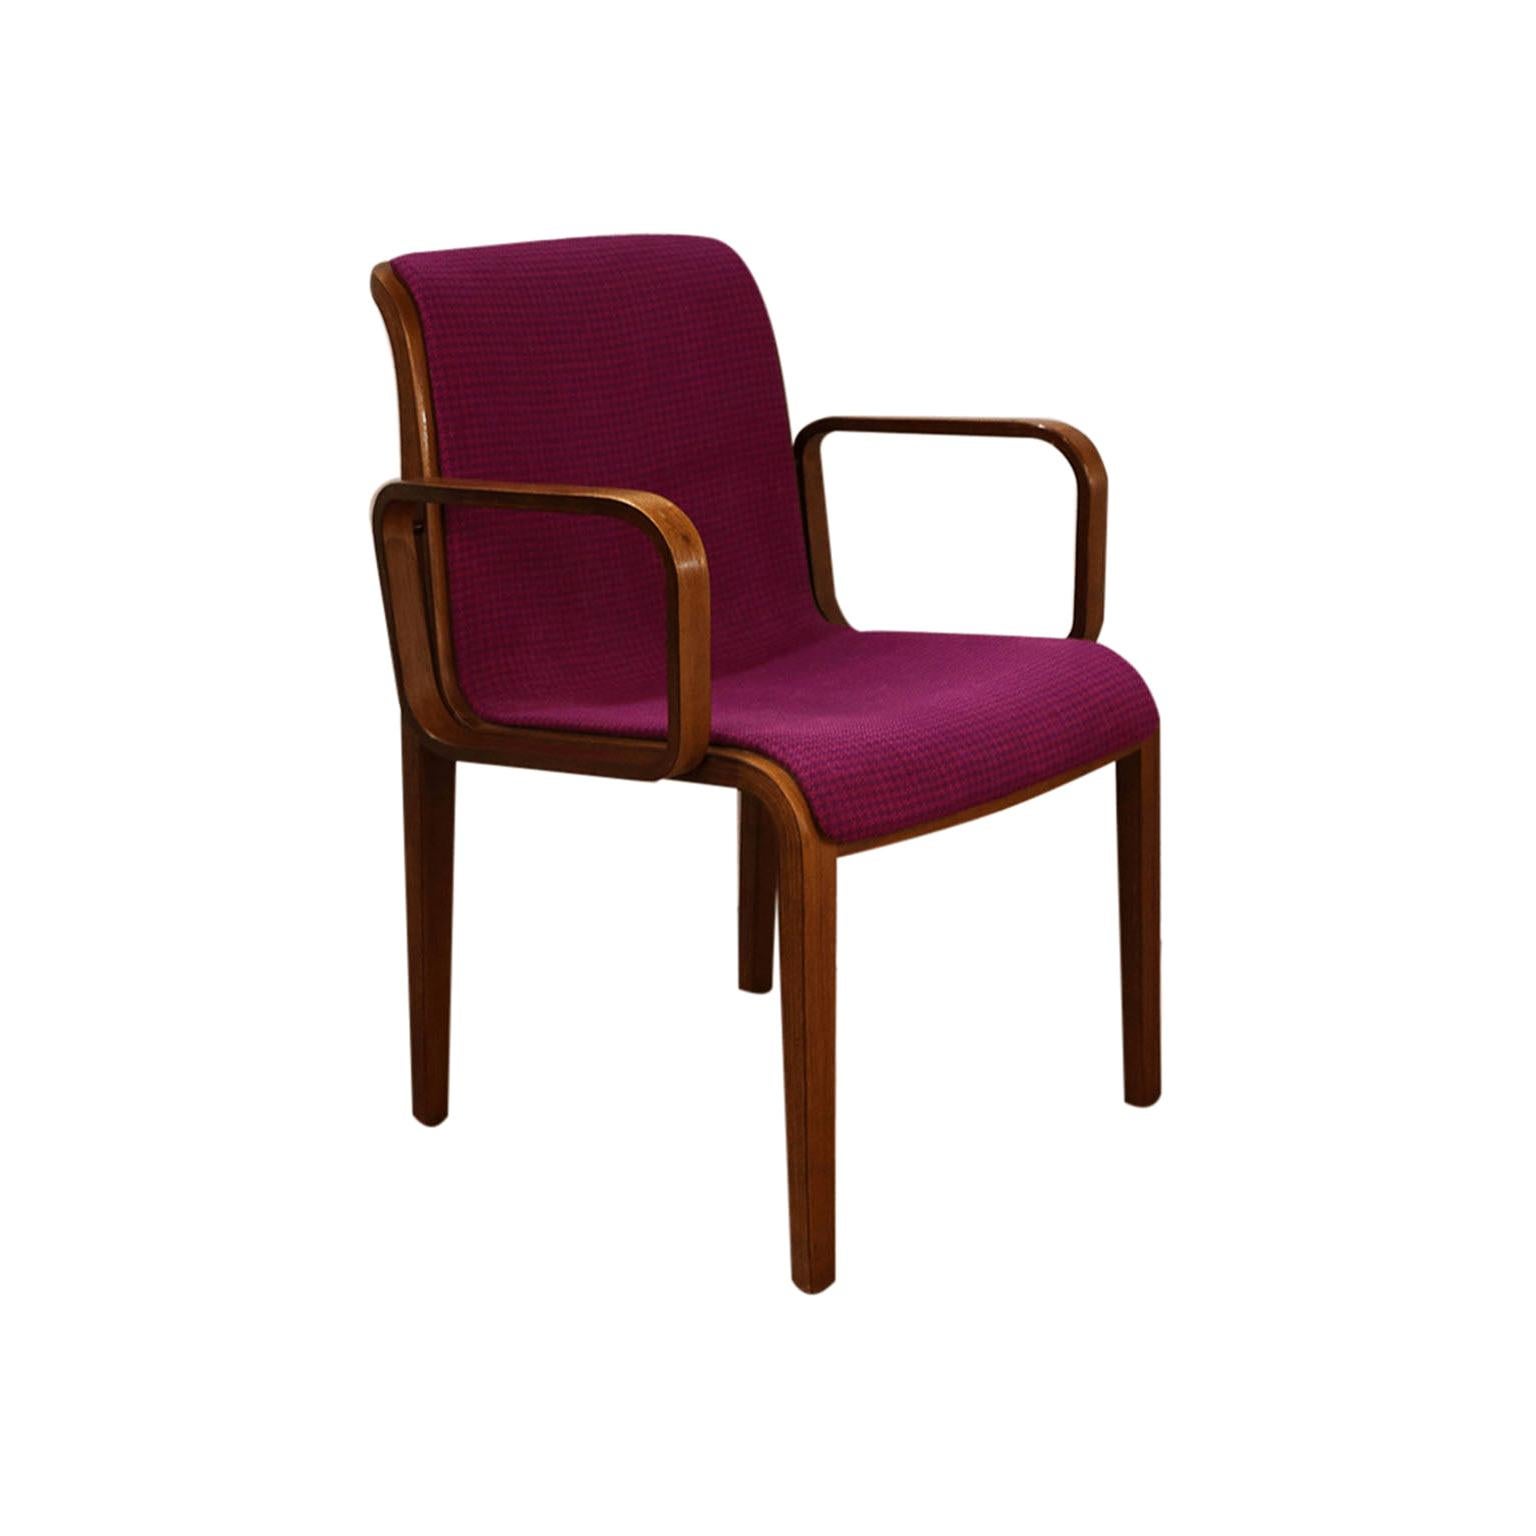 Midcentury Bill Stephens Knoll Bentwood Chair